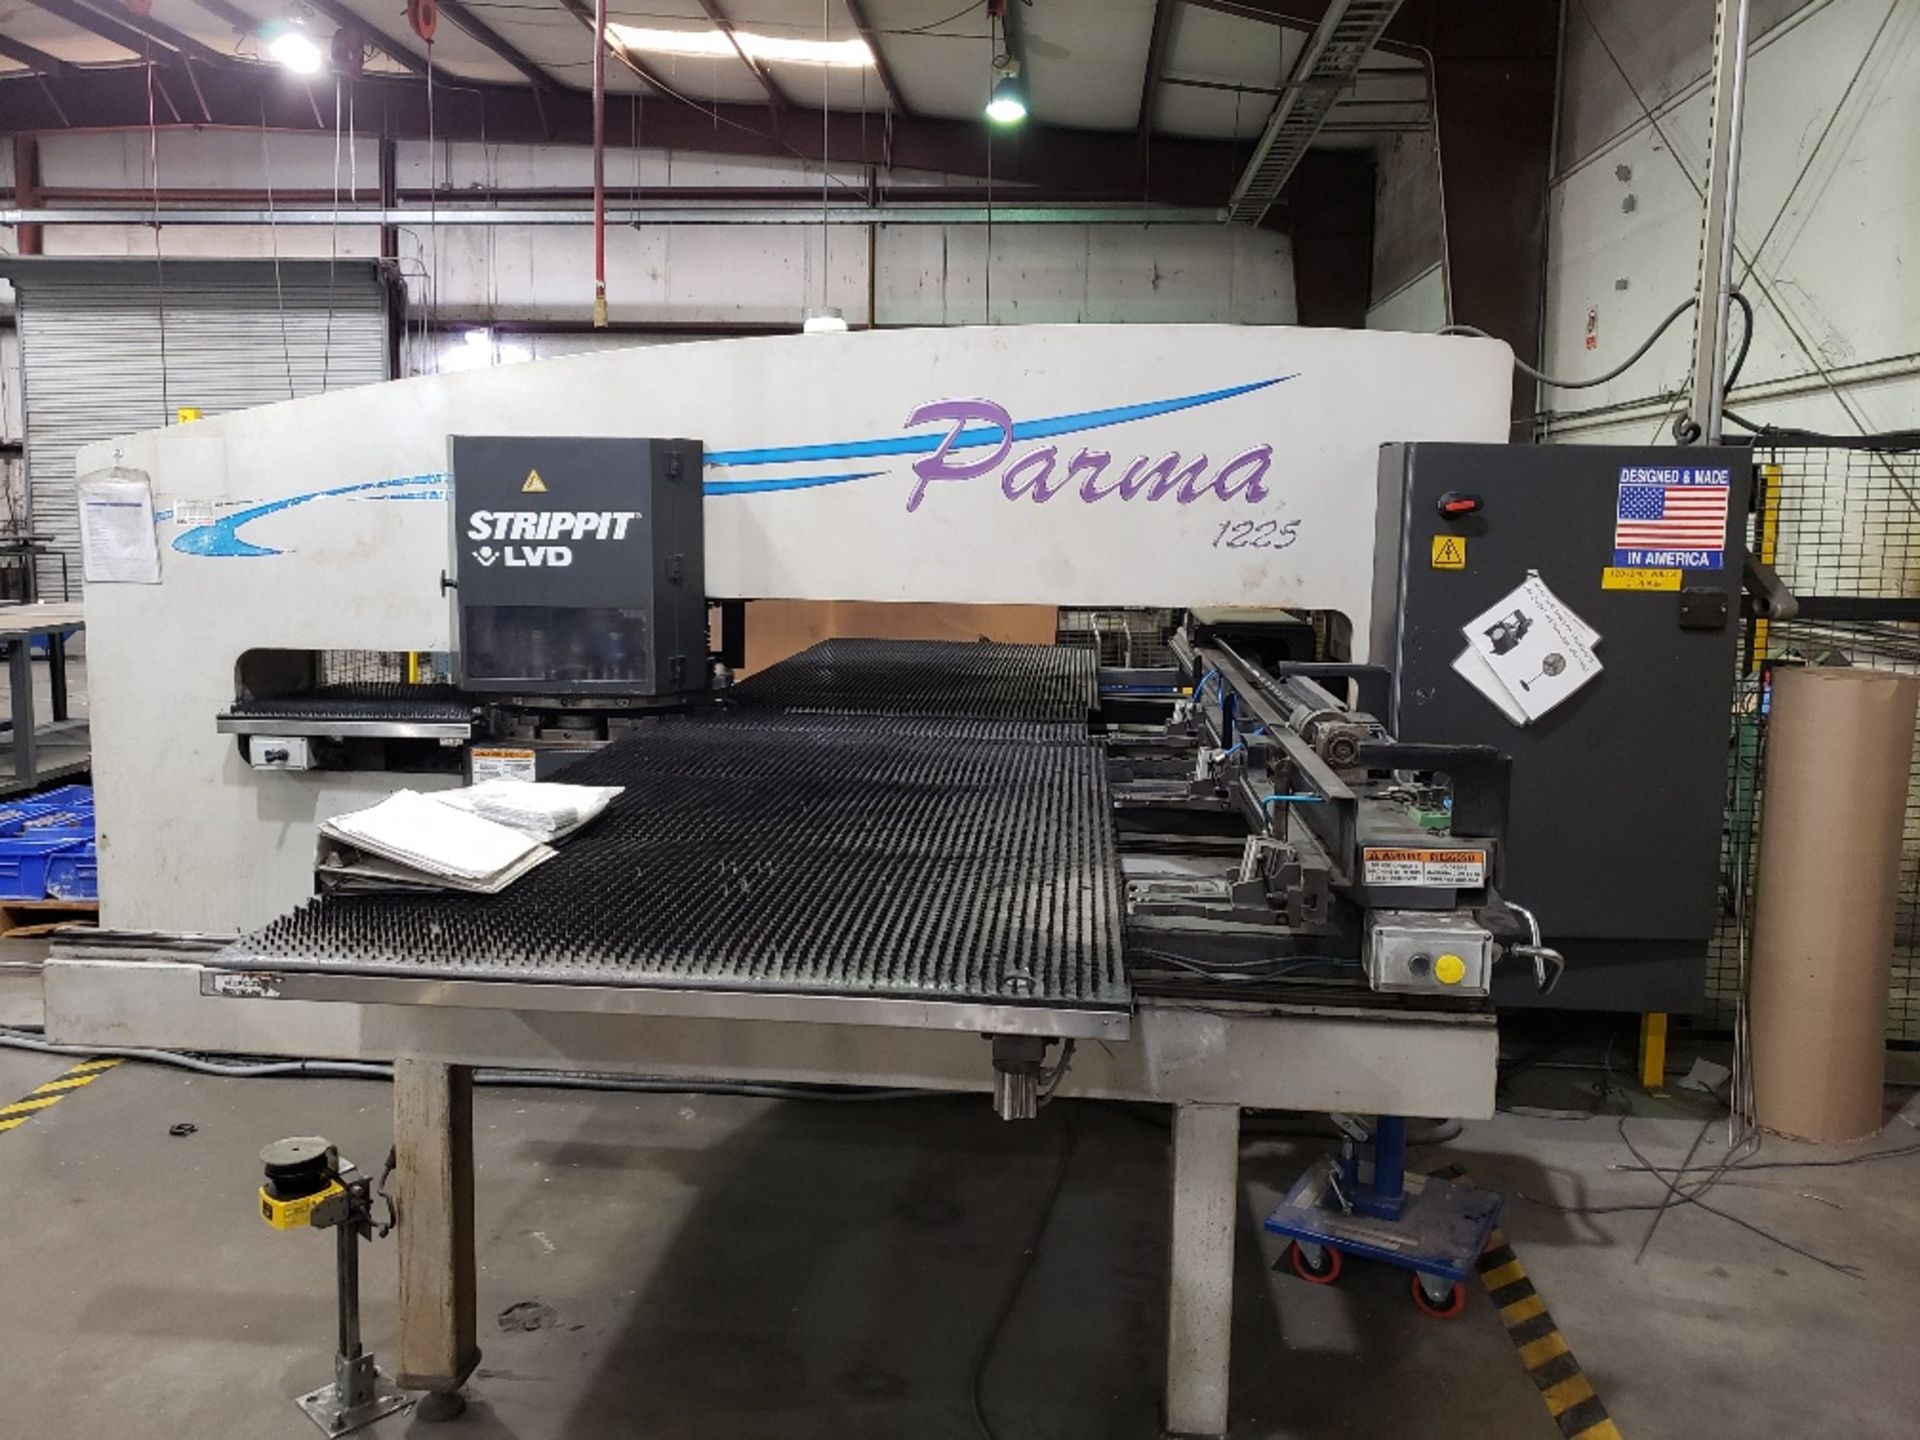 20 Ton Strippit Model Parma 1225 CNC Turret **Loading Fee Due the "ERRA" DFW Movers, $3,750.00**